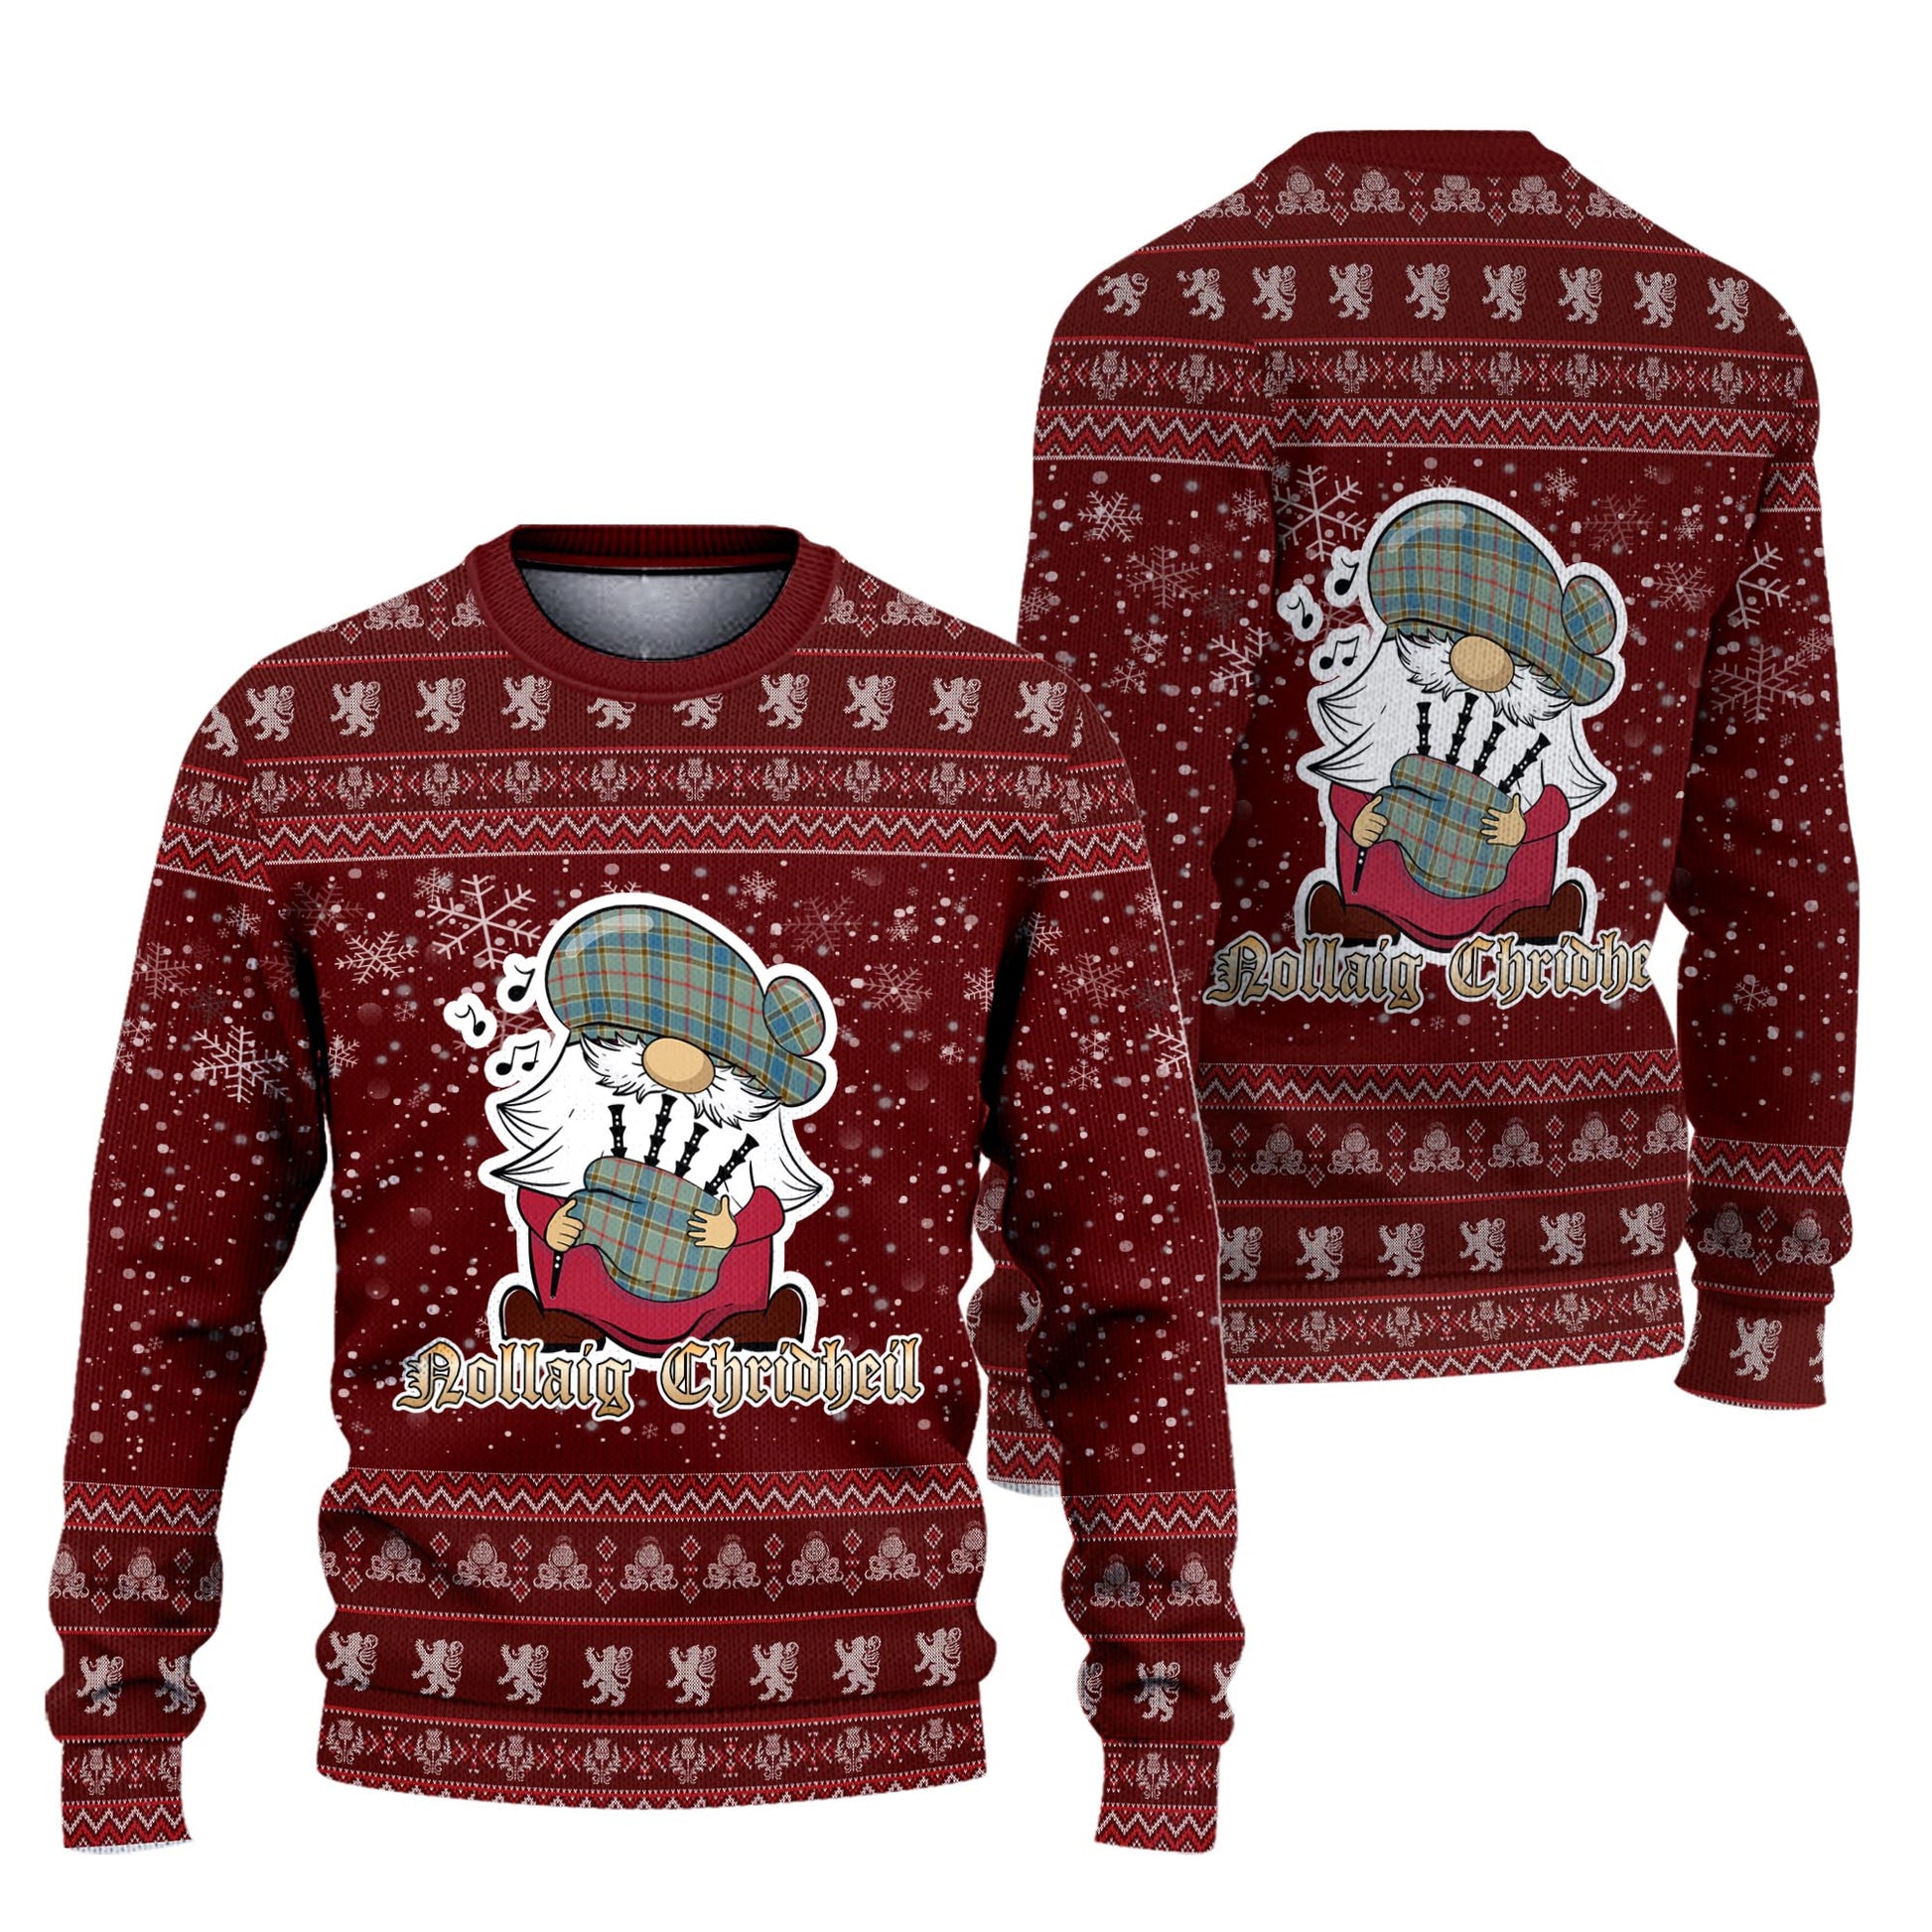 Balfour Blue Clan Christmas Family Knitted Sweater with Funny Gnome Playing Bagpipes Unisex Red - Tartanvibesclothing